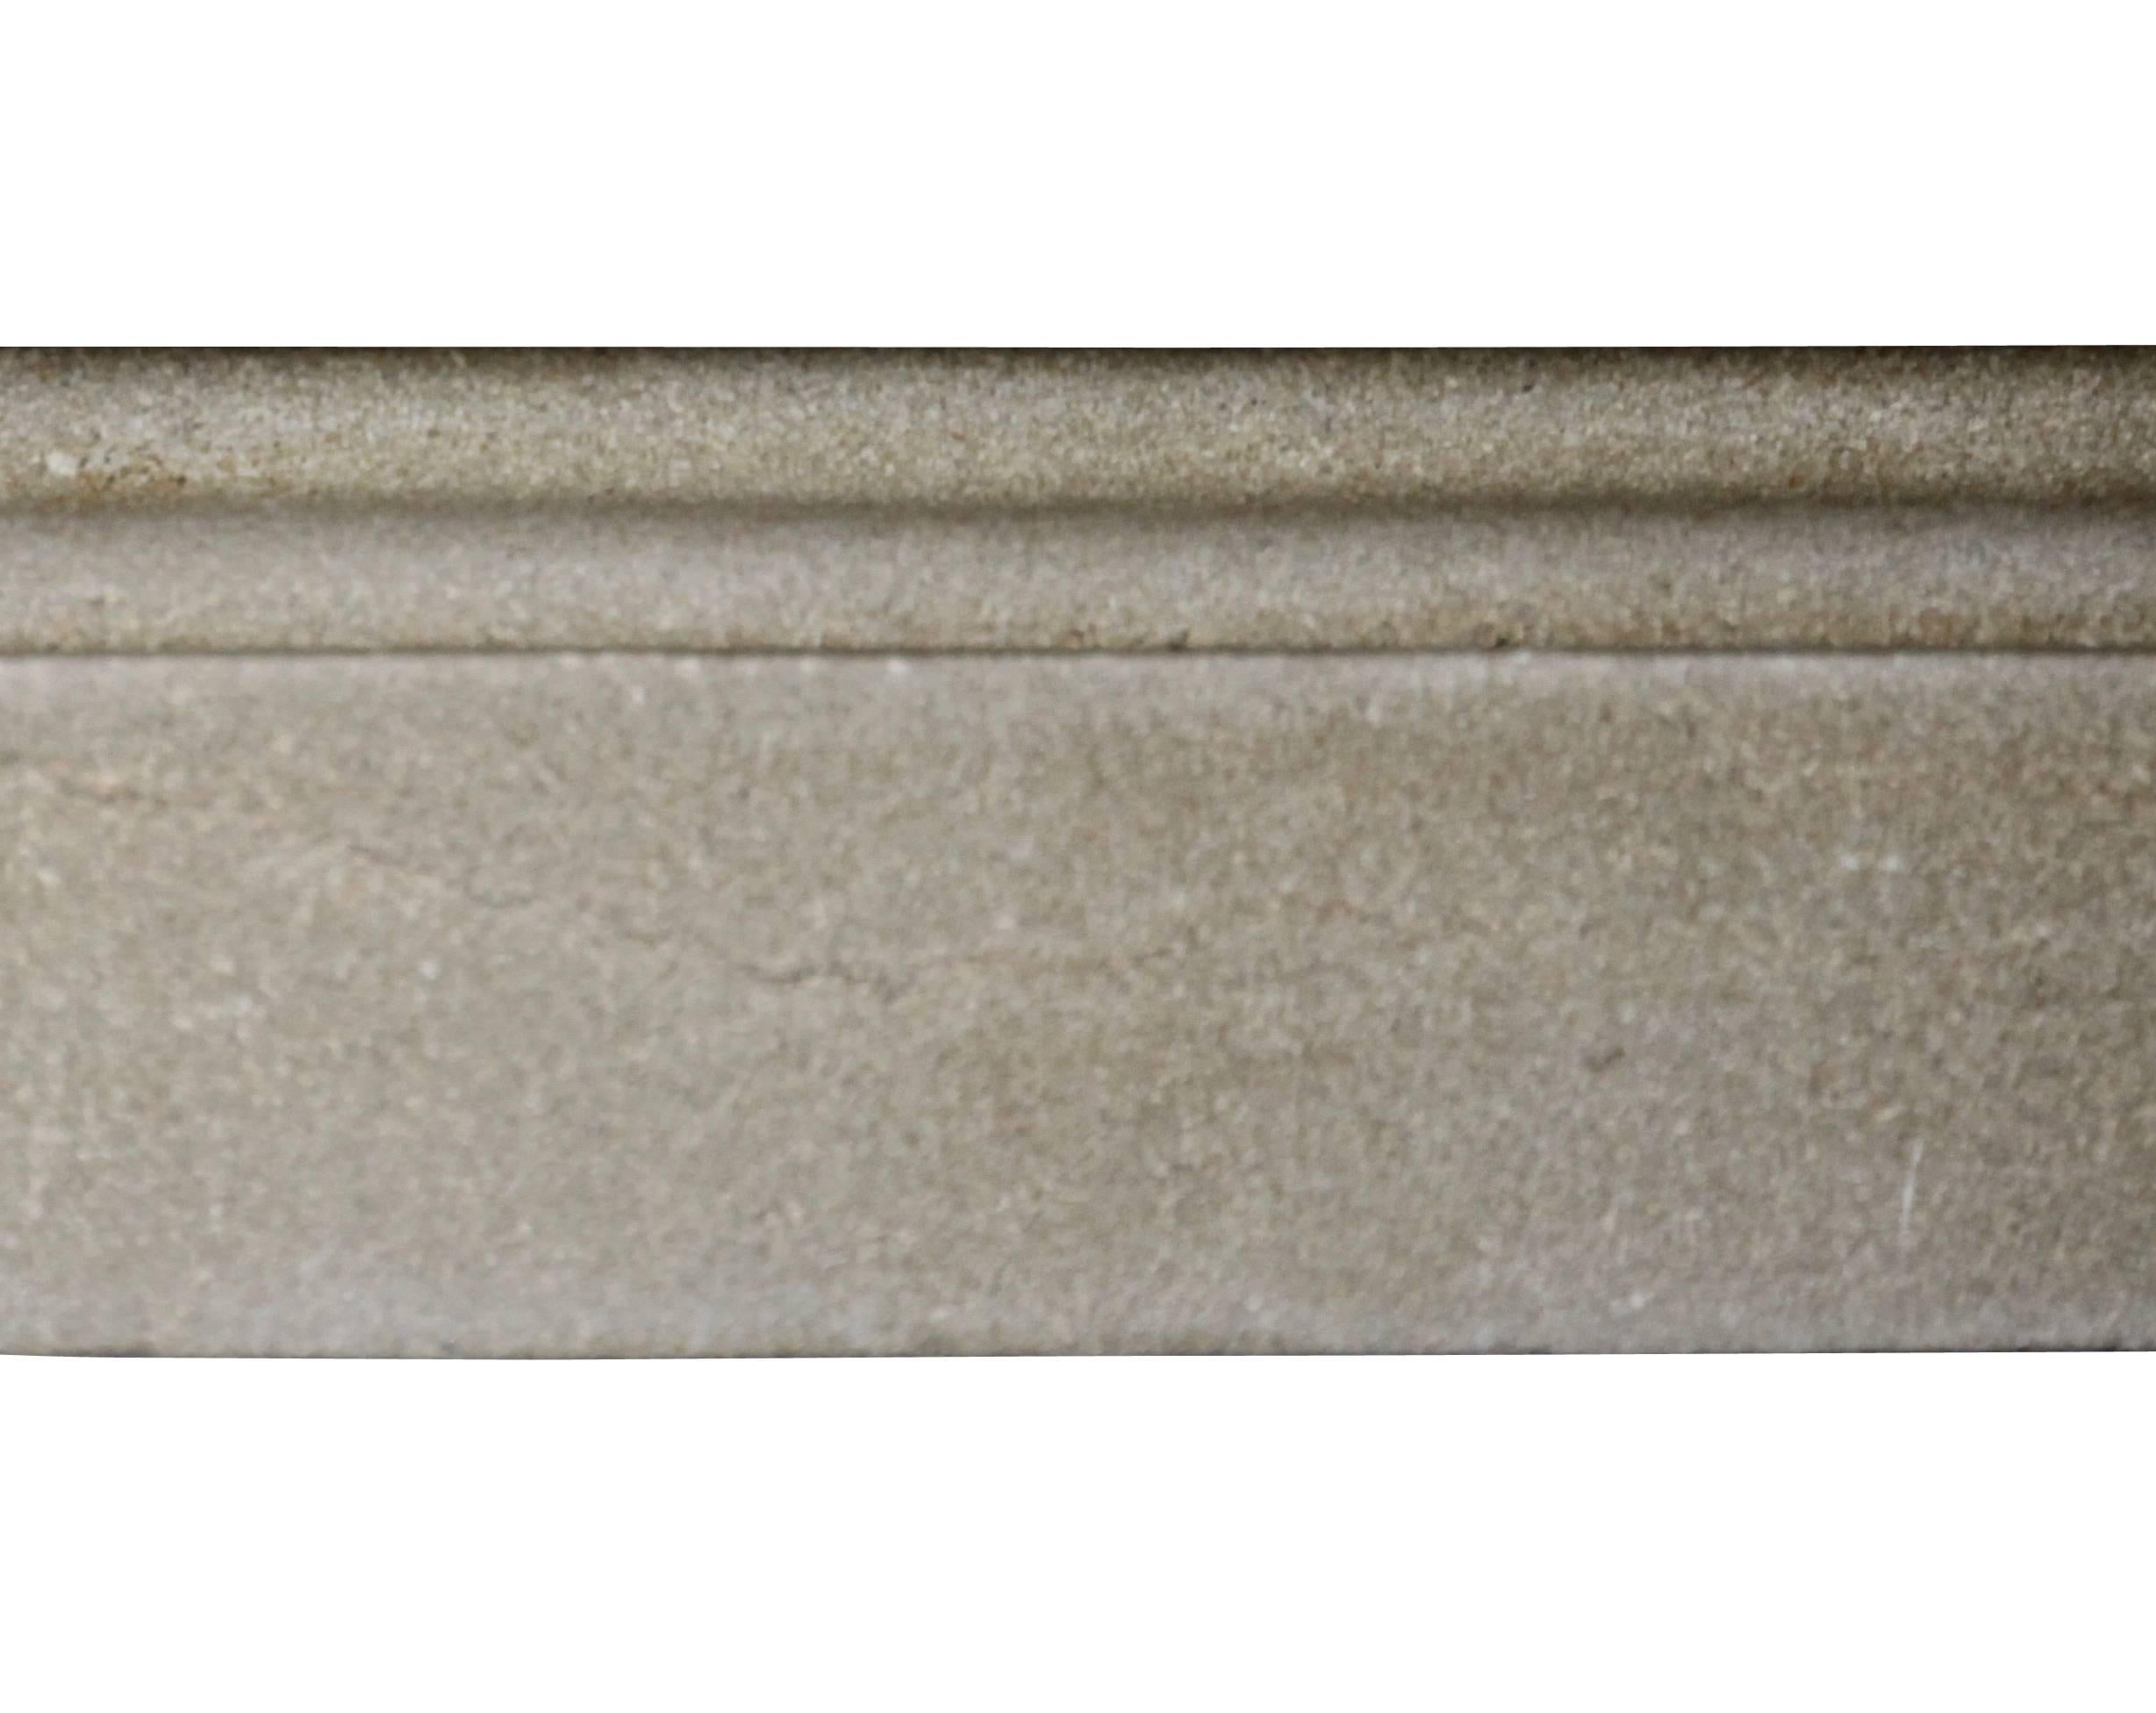 This is a petite Burgundy hard stone mantel from the late Louis Philippe period. This coming from the small town, Buxy, in the beaujolais region.
 
Measures;
114 cm EW 44,88